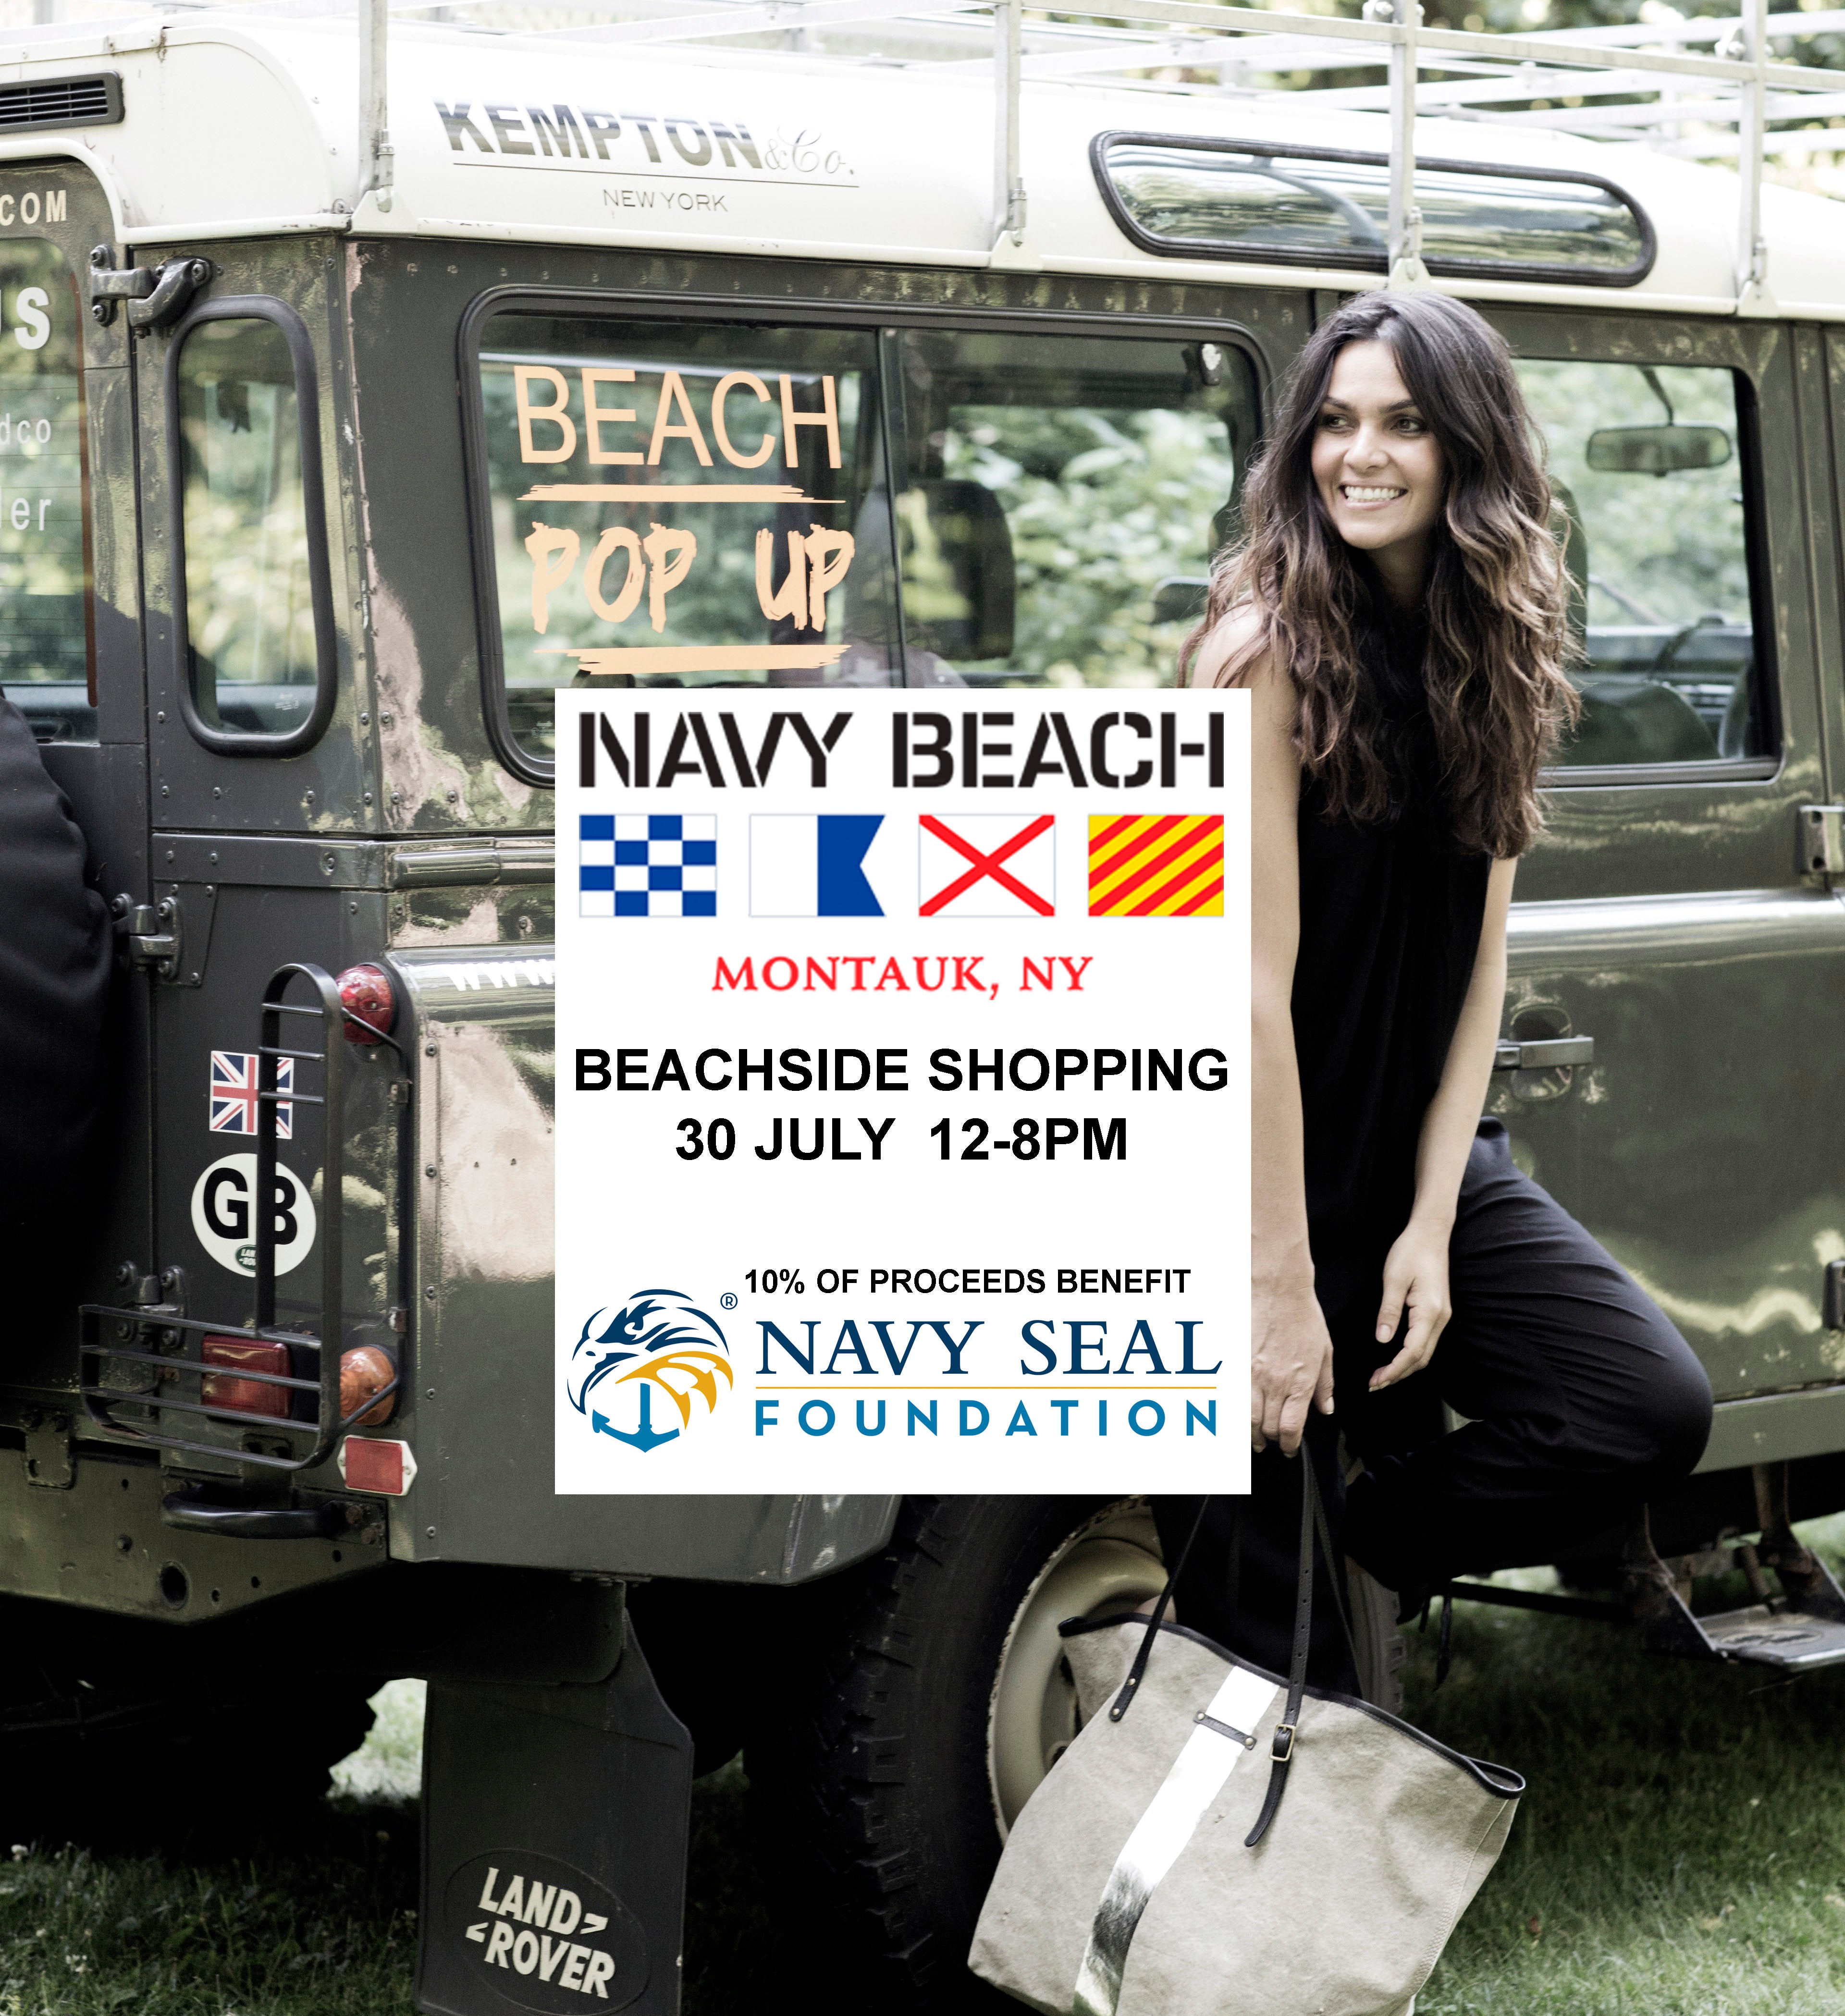 Navy Beach Pop Up Event - Thank You for Joining Us!